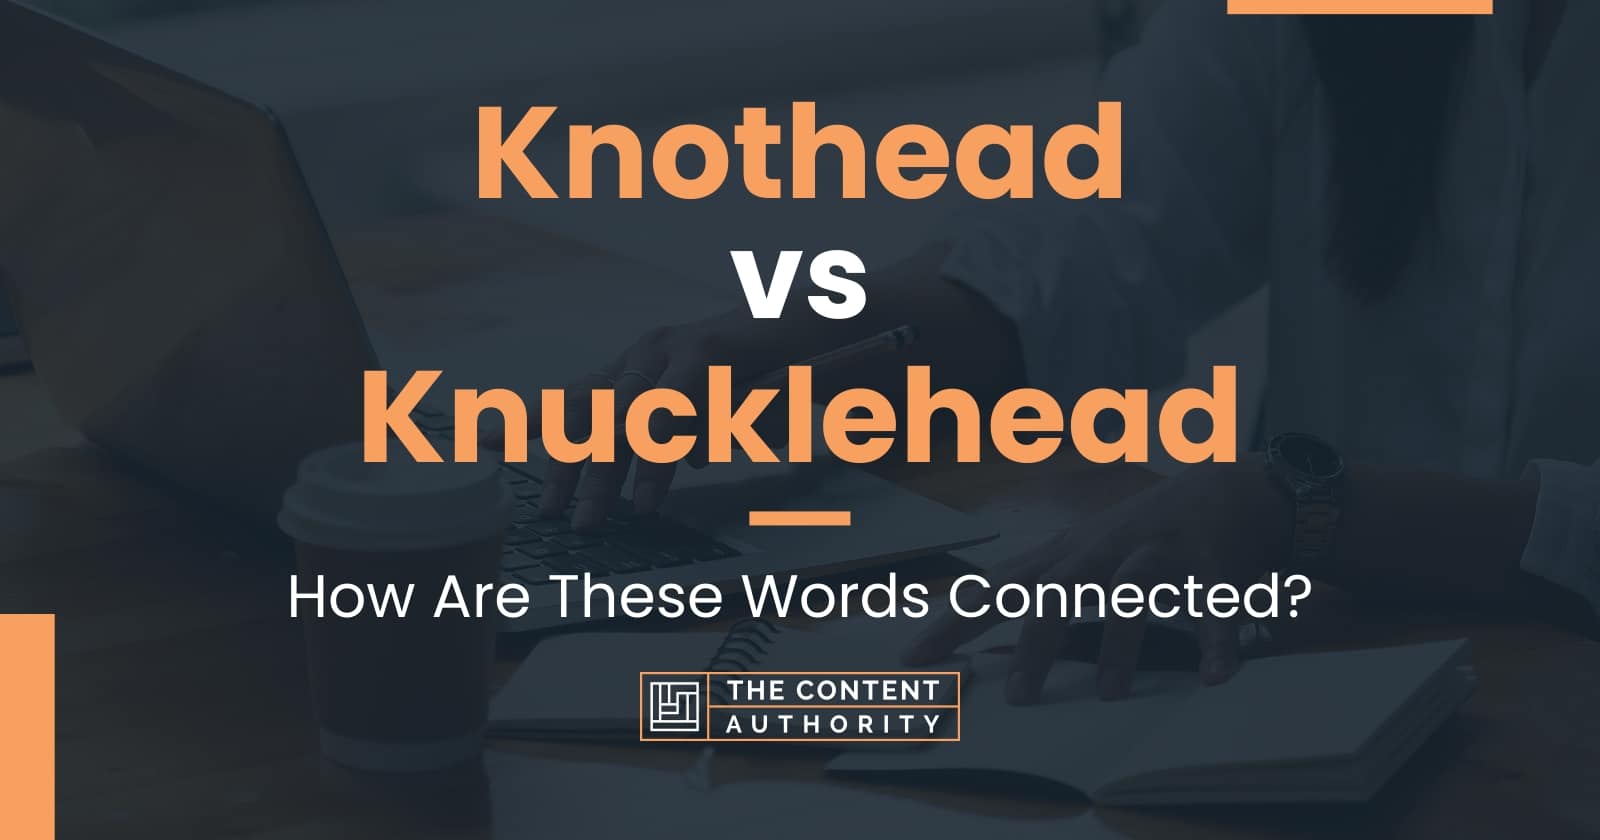 Knothead vs Knucklehead: How Are These Words Connected?